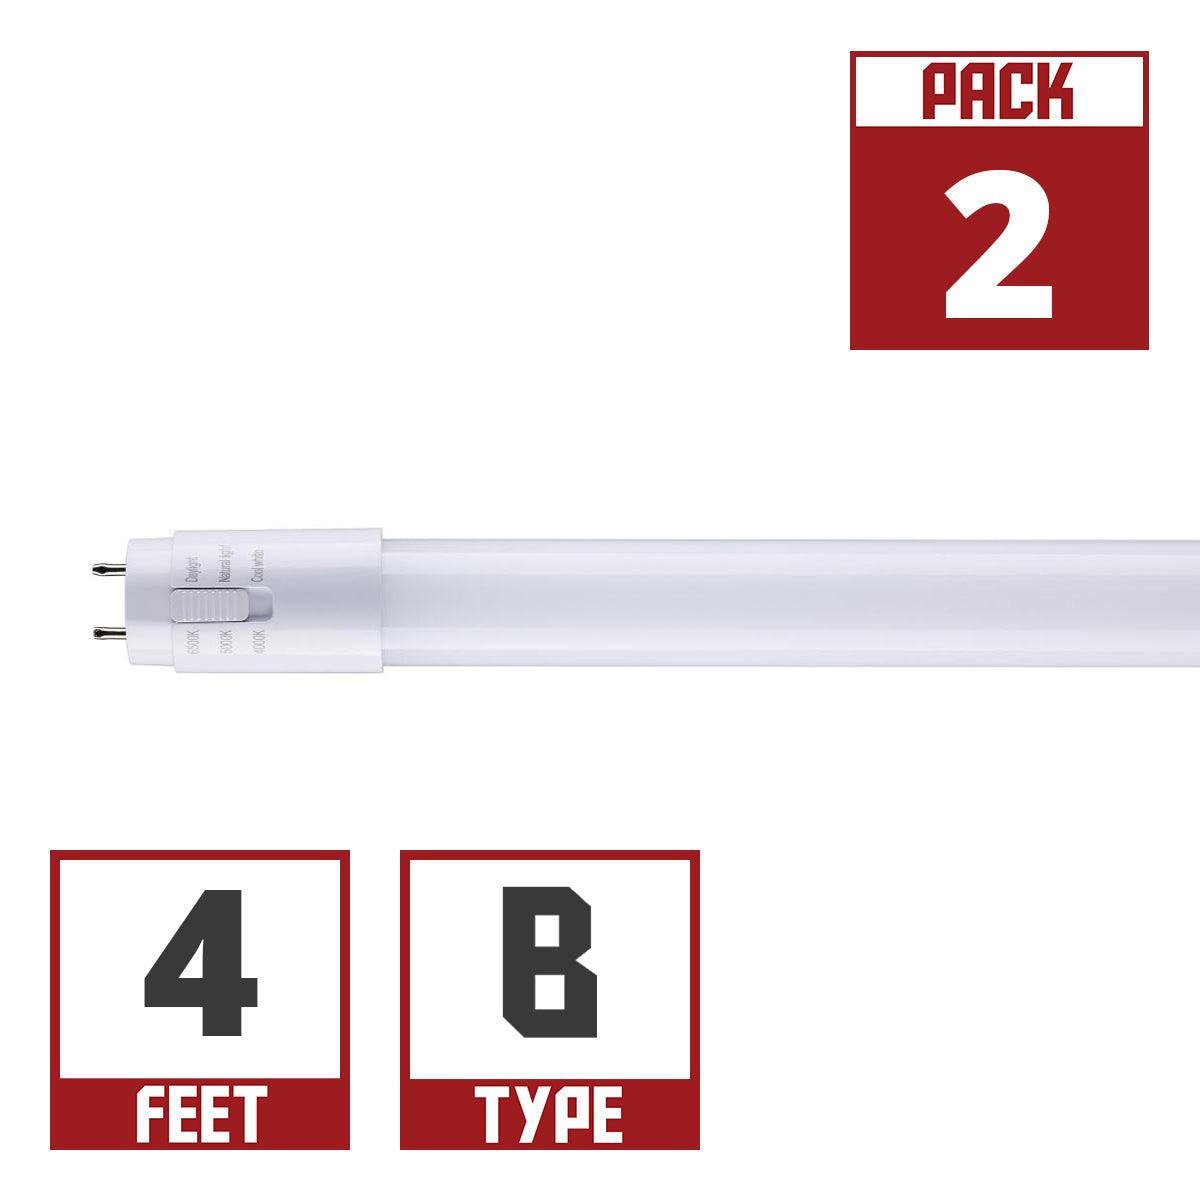 4ft LED T8 Tube, 12.5 Watt, 1800 Lumens, Selectable CCT 40K/50K/65K, F32T8 Replacement, Ballast Bypass, Single/Dual End, Case Of 2 - Bees Lighting